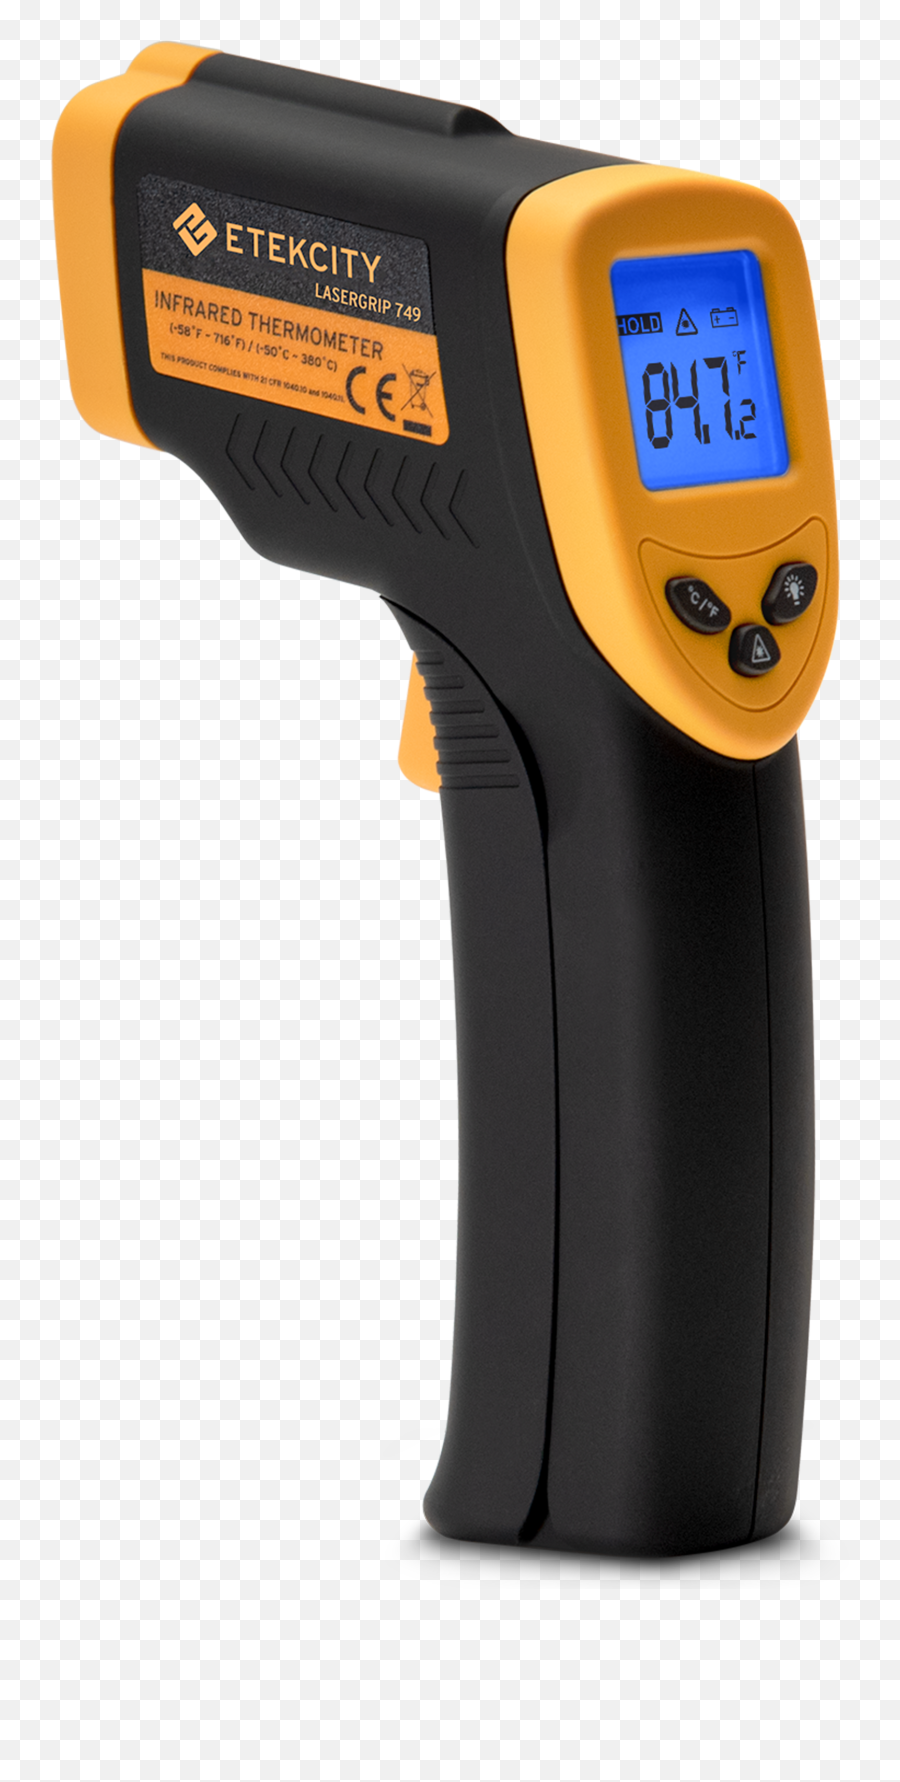 Lasergrip 774 Infrared Thermometer Emoji,Thermometer Transparent Background